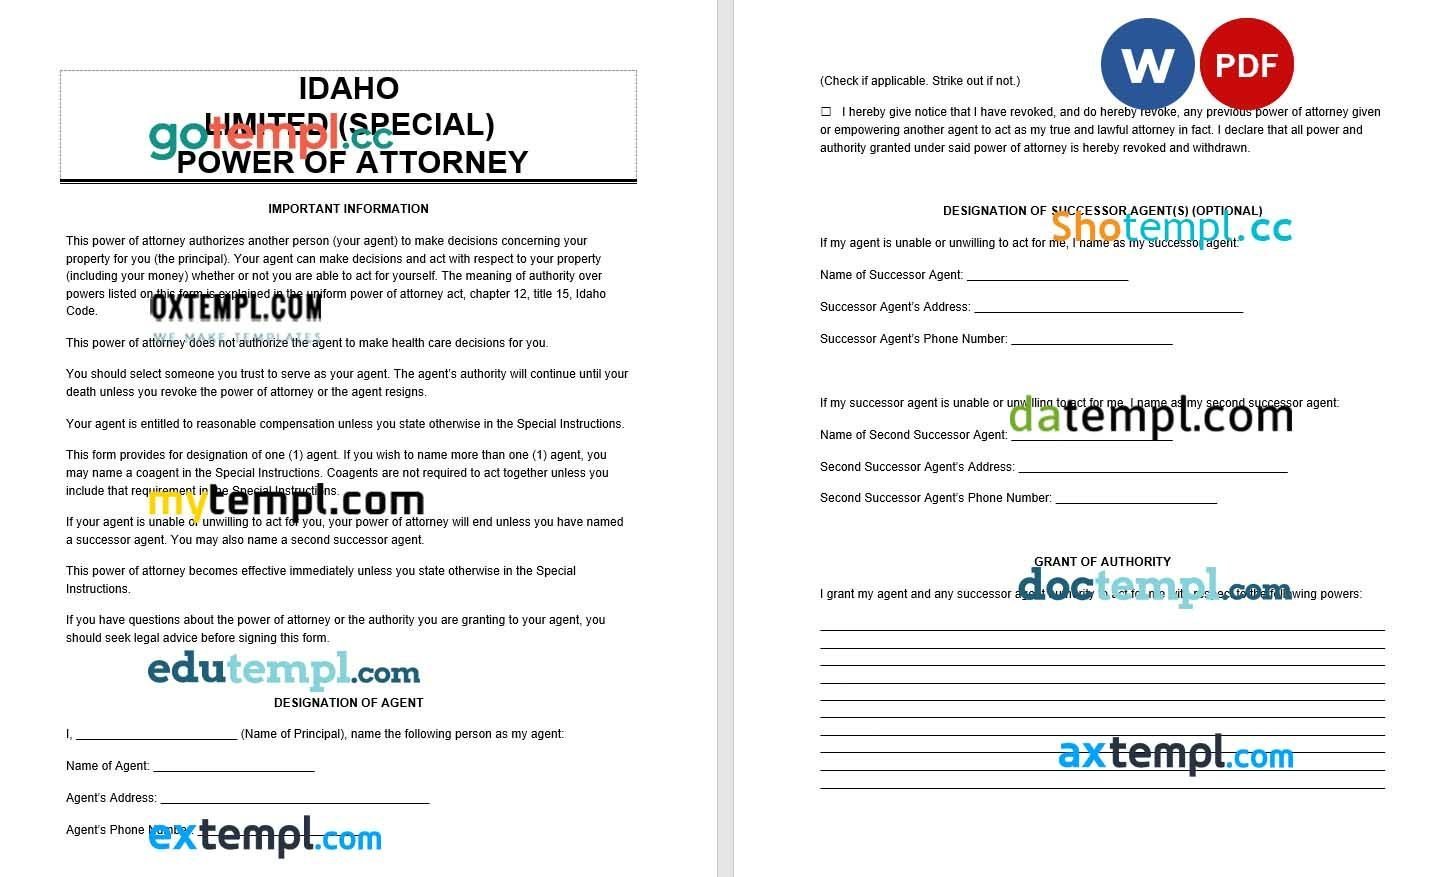 Rhode Island Real Estate Power of Atorney Form example, fully editable